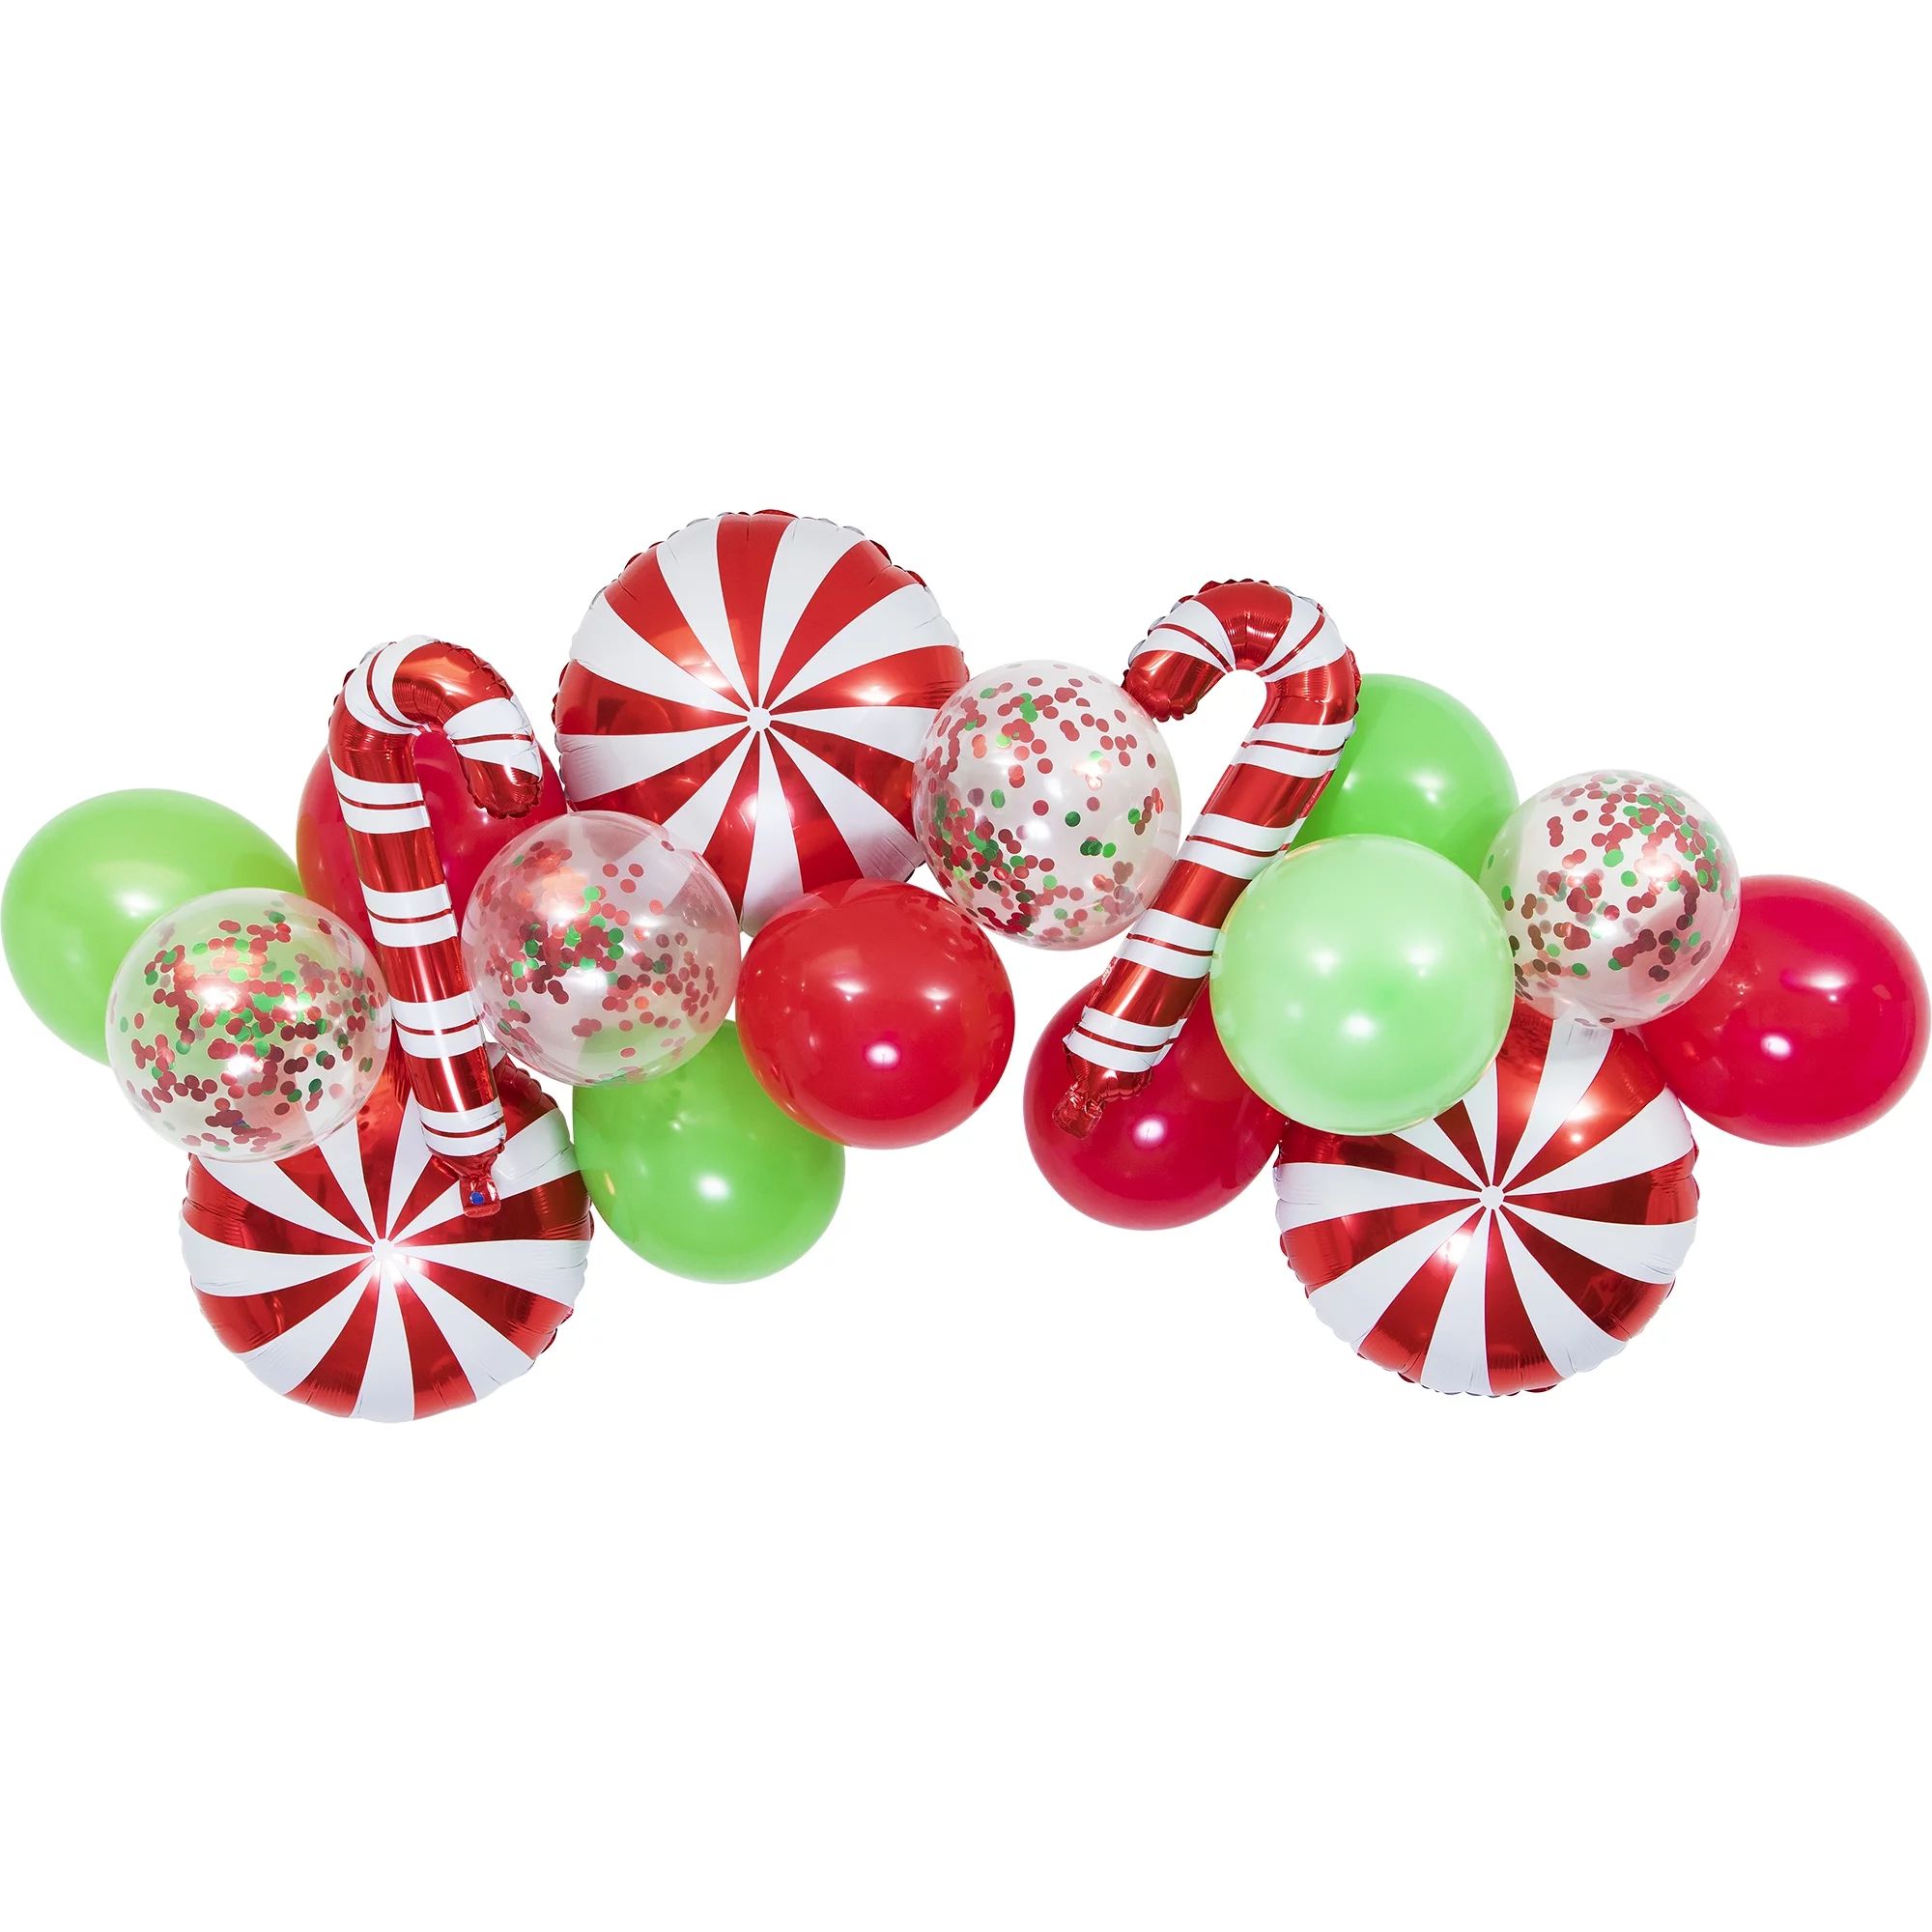 Mylar Christmas Candy Confetti Balloon Arch, 197 in x 6 in, by Holiday Time | Walmart (US)